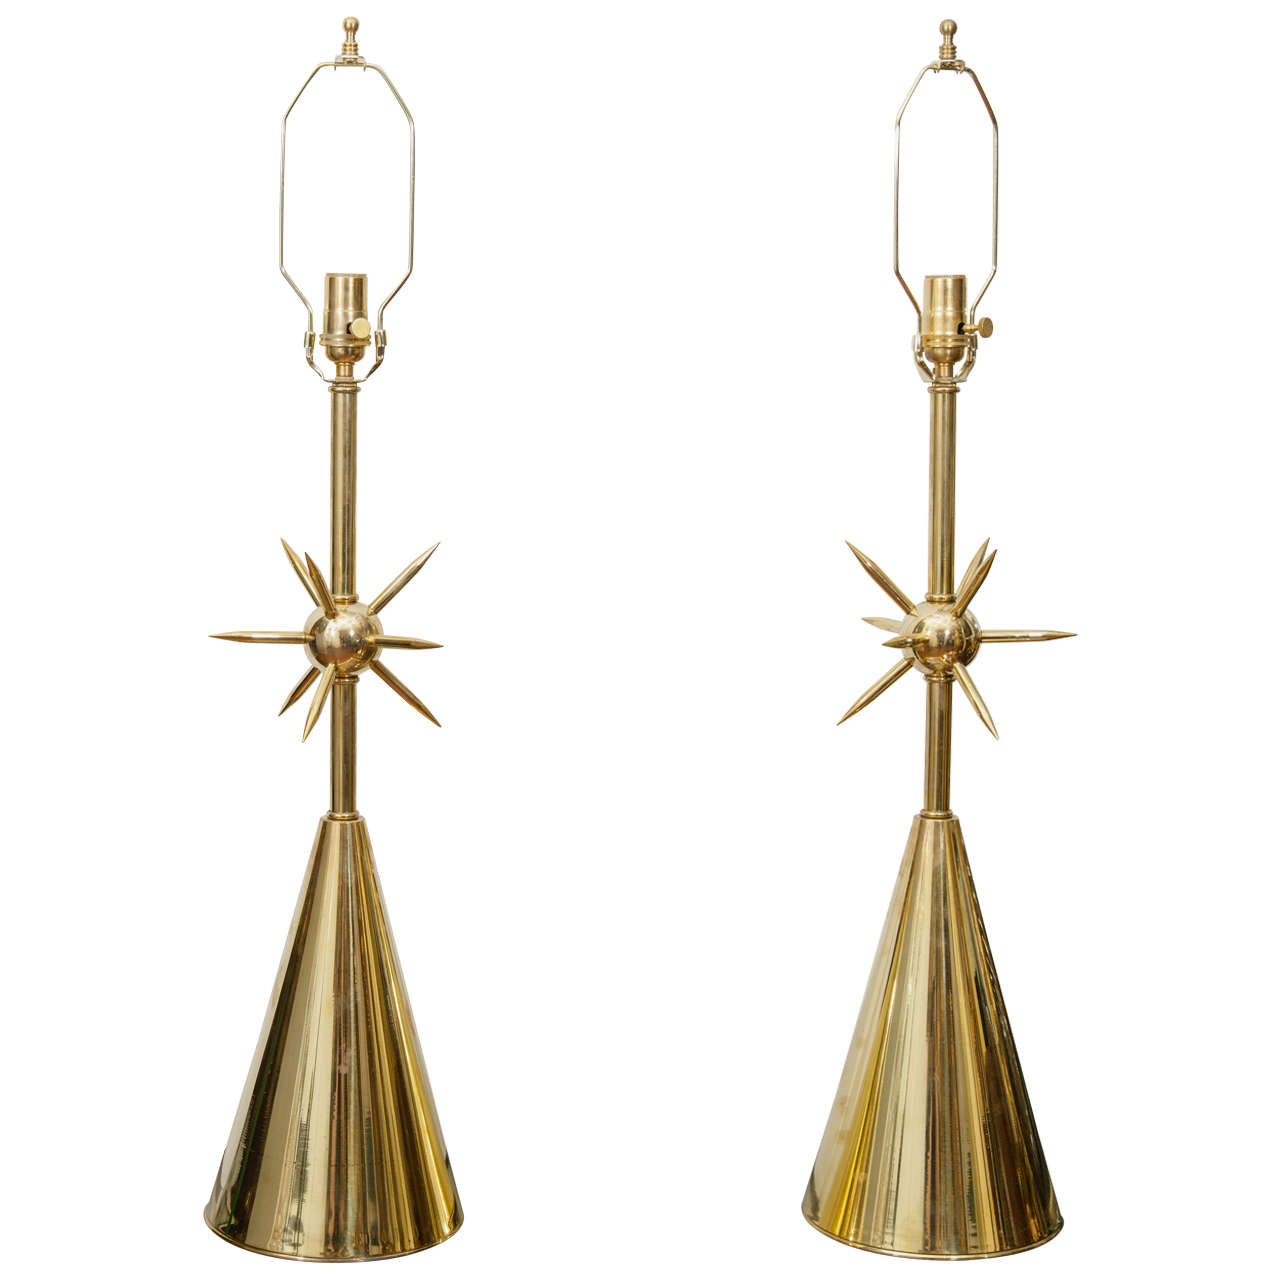 Pair of Brass Table Lamps with Sputnik Detail at Centre